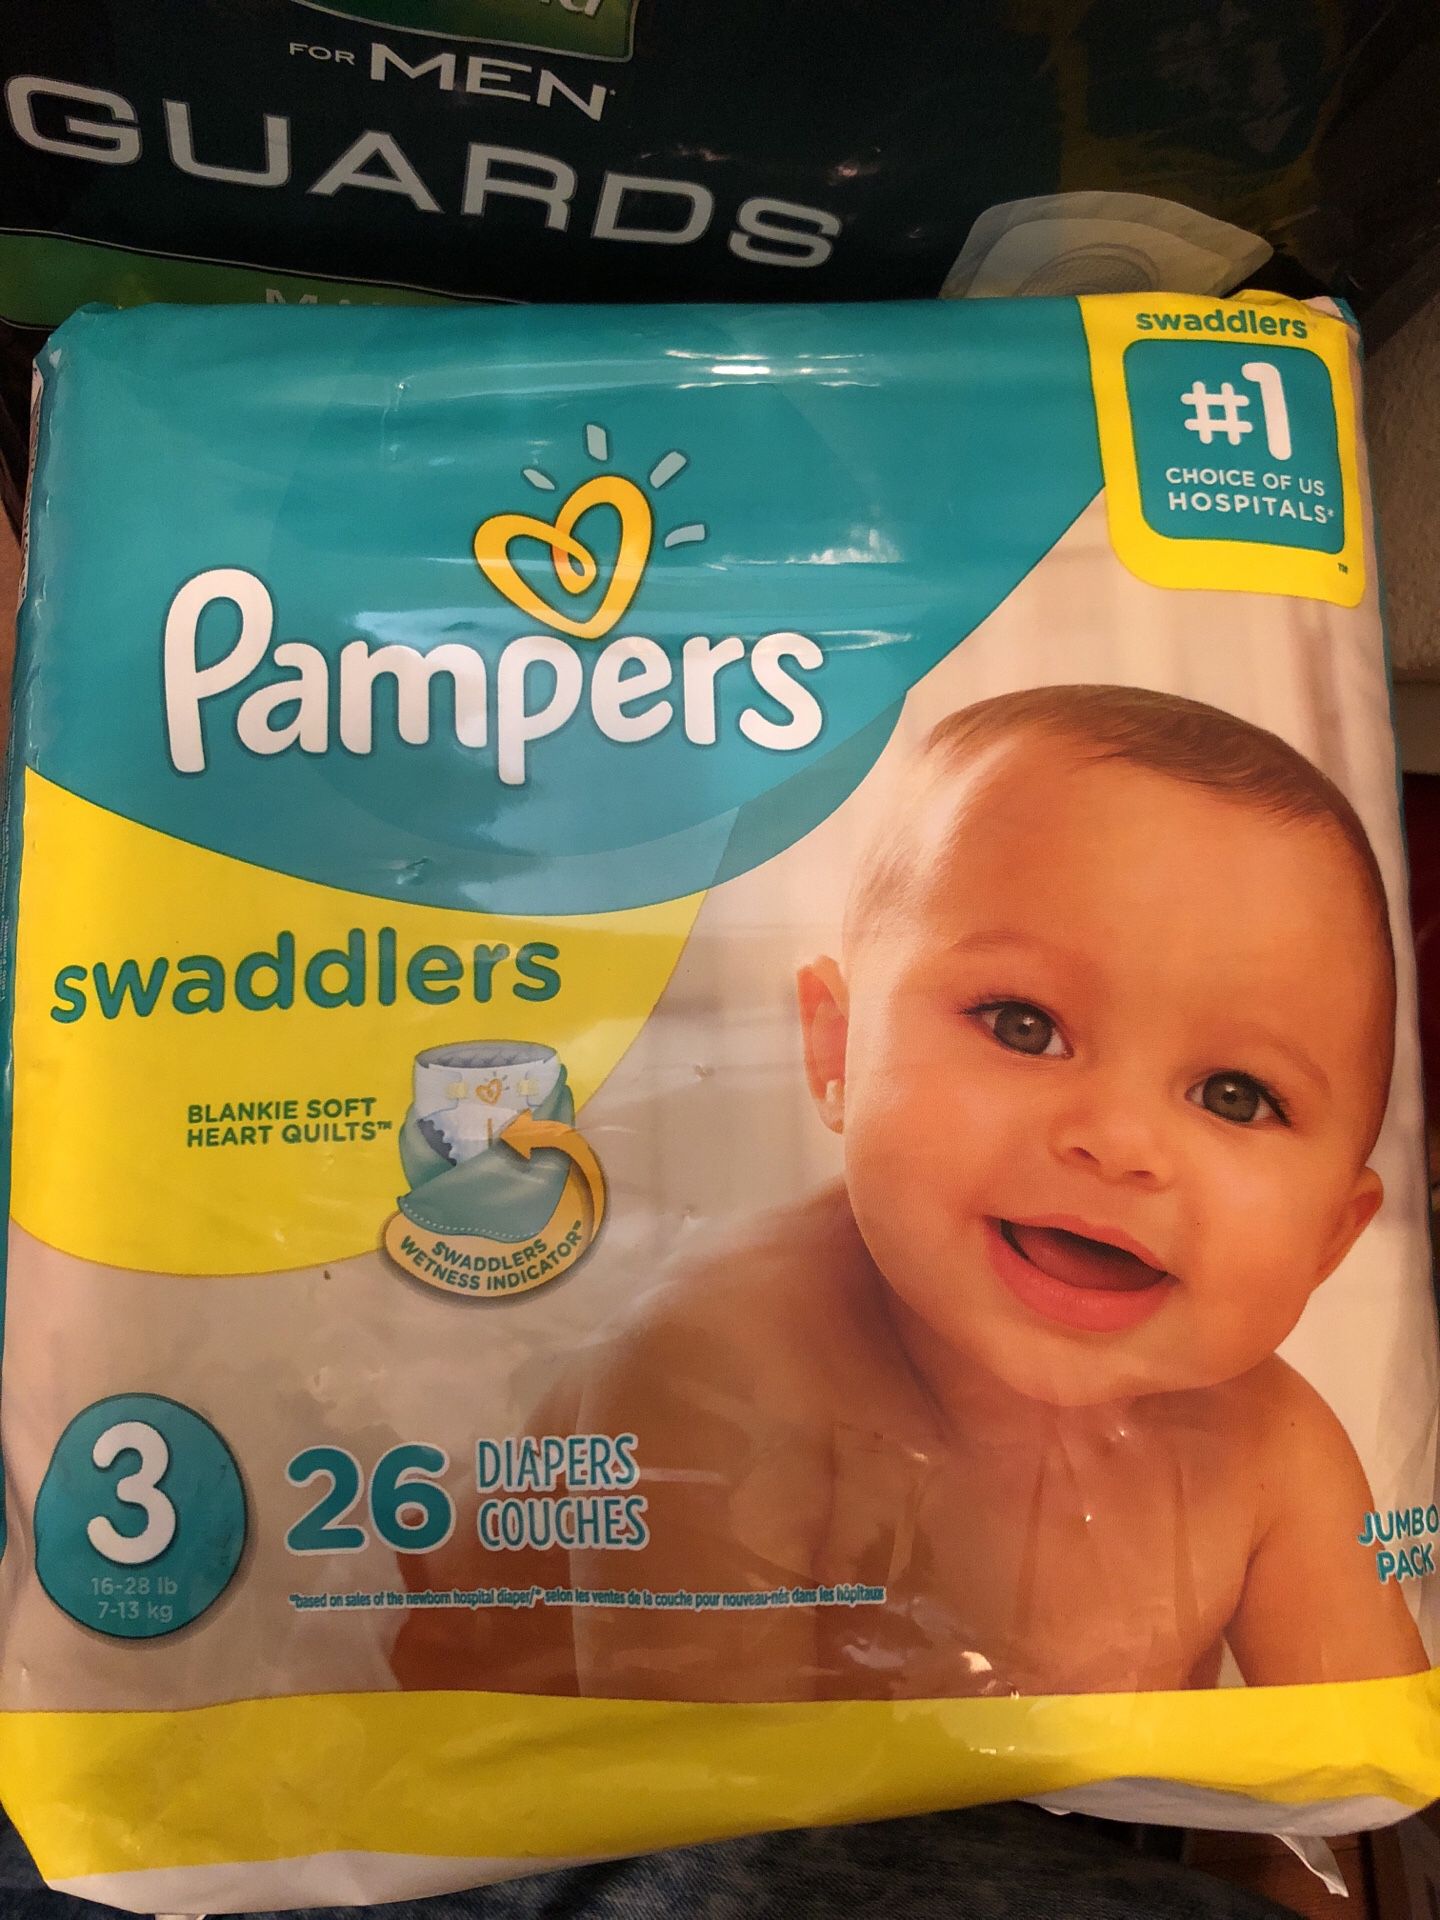 Pampers Swaddlers size 3 diapers